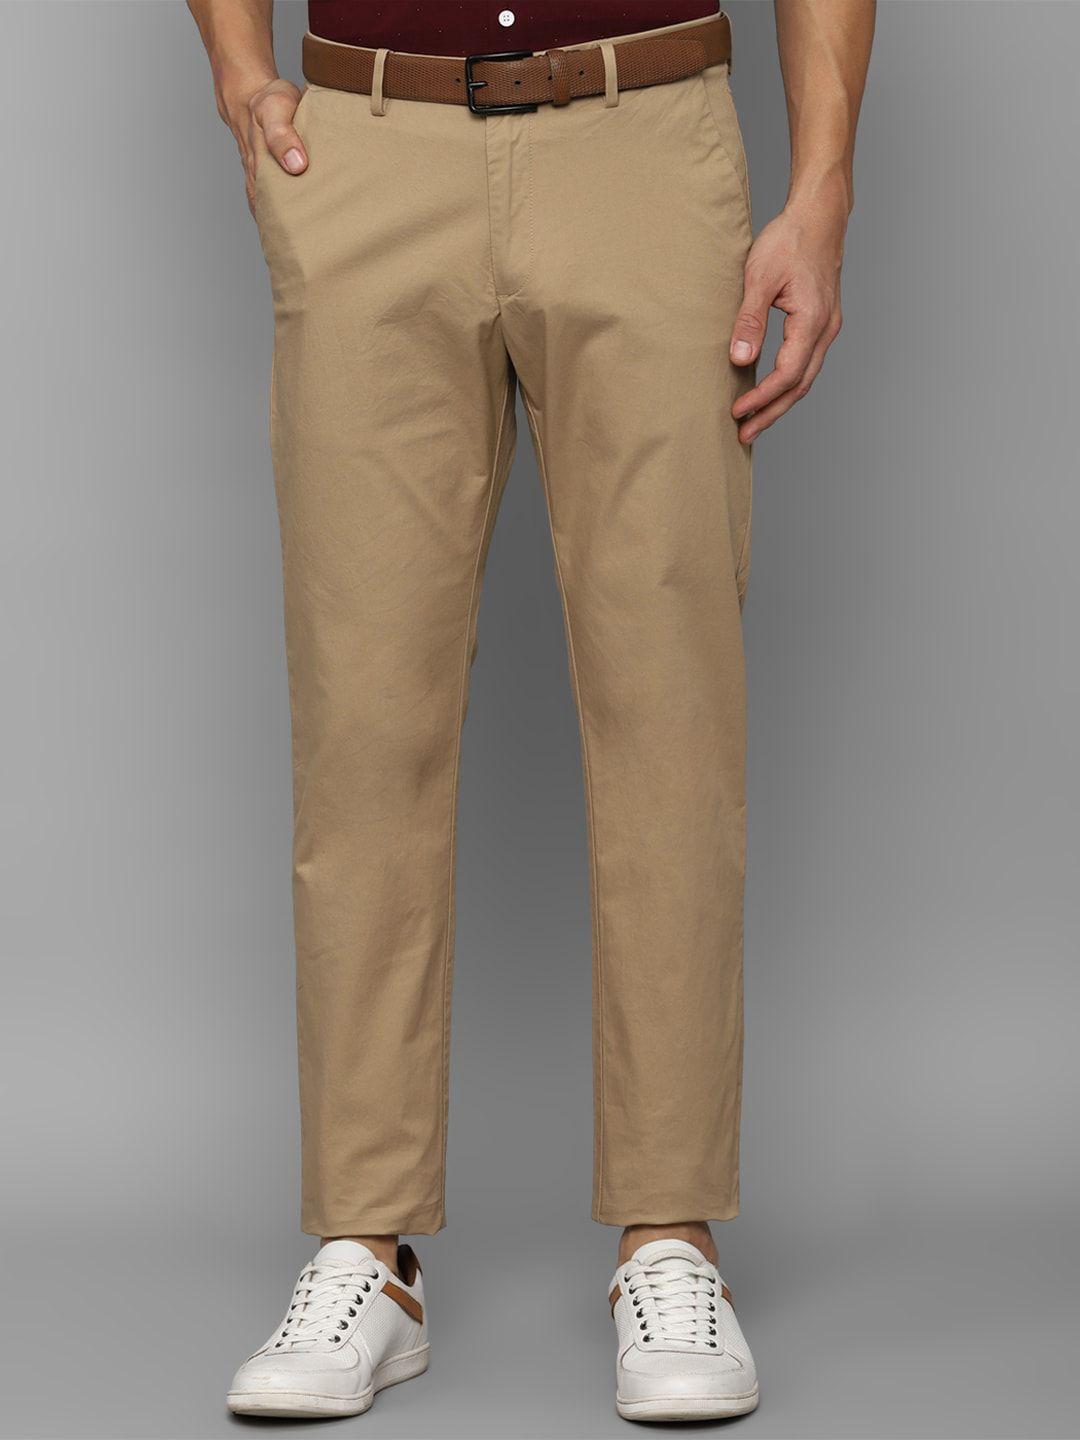 allen solly men chinos trousers